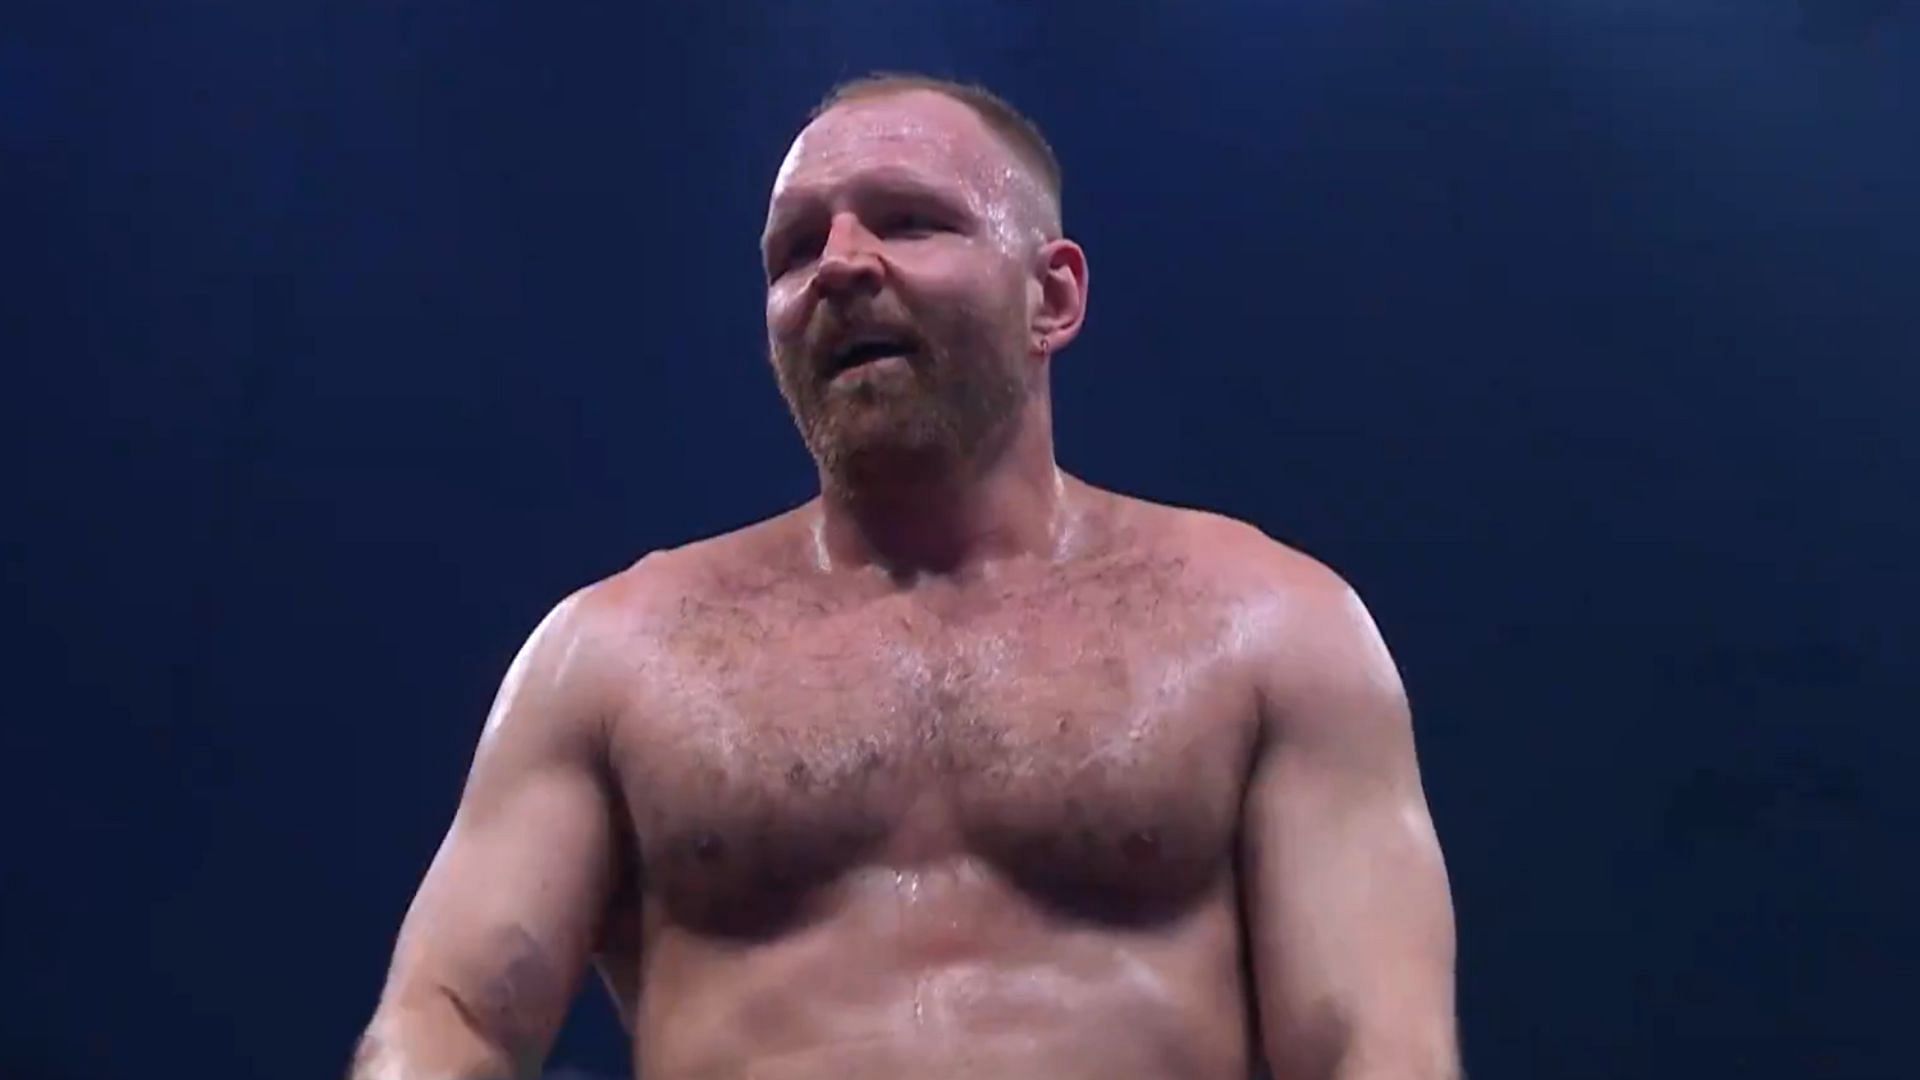 Jon Moxley is a former WWE and AEW World Champion